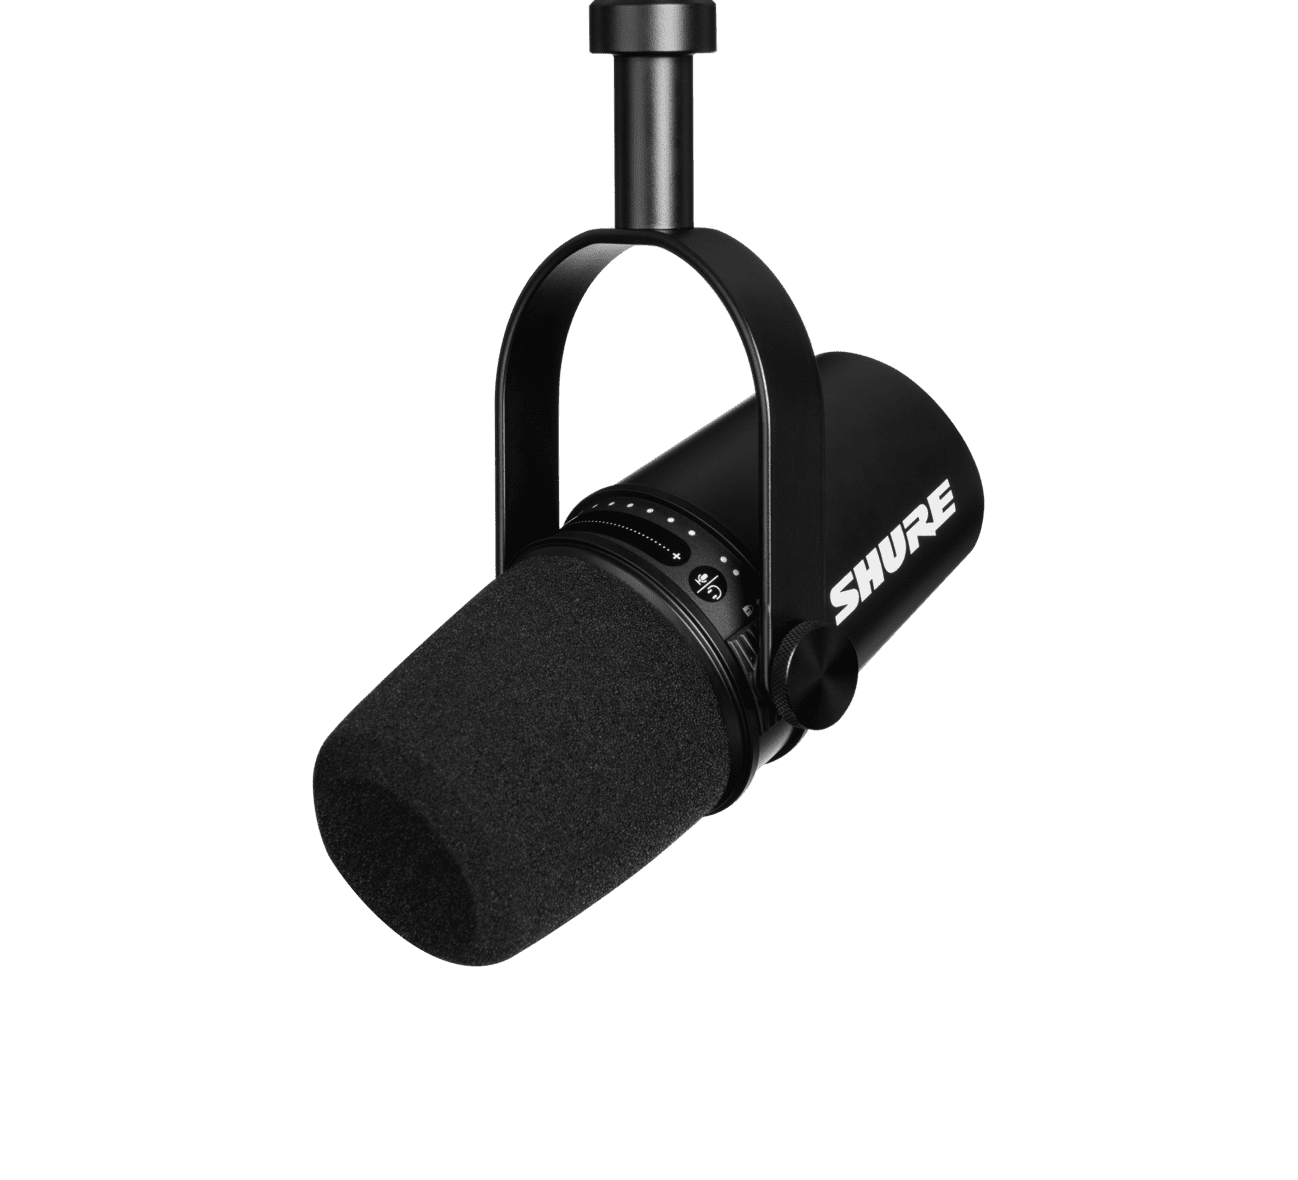 New for 2020: Shure MV7 Podcast Microphone